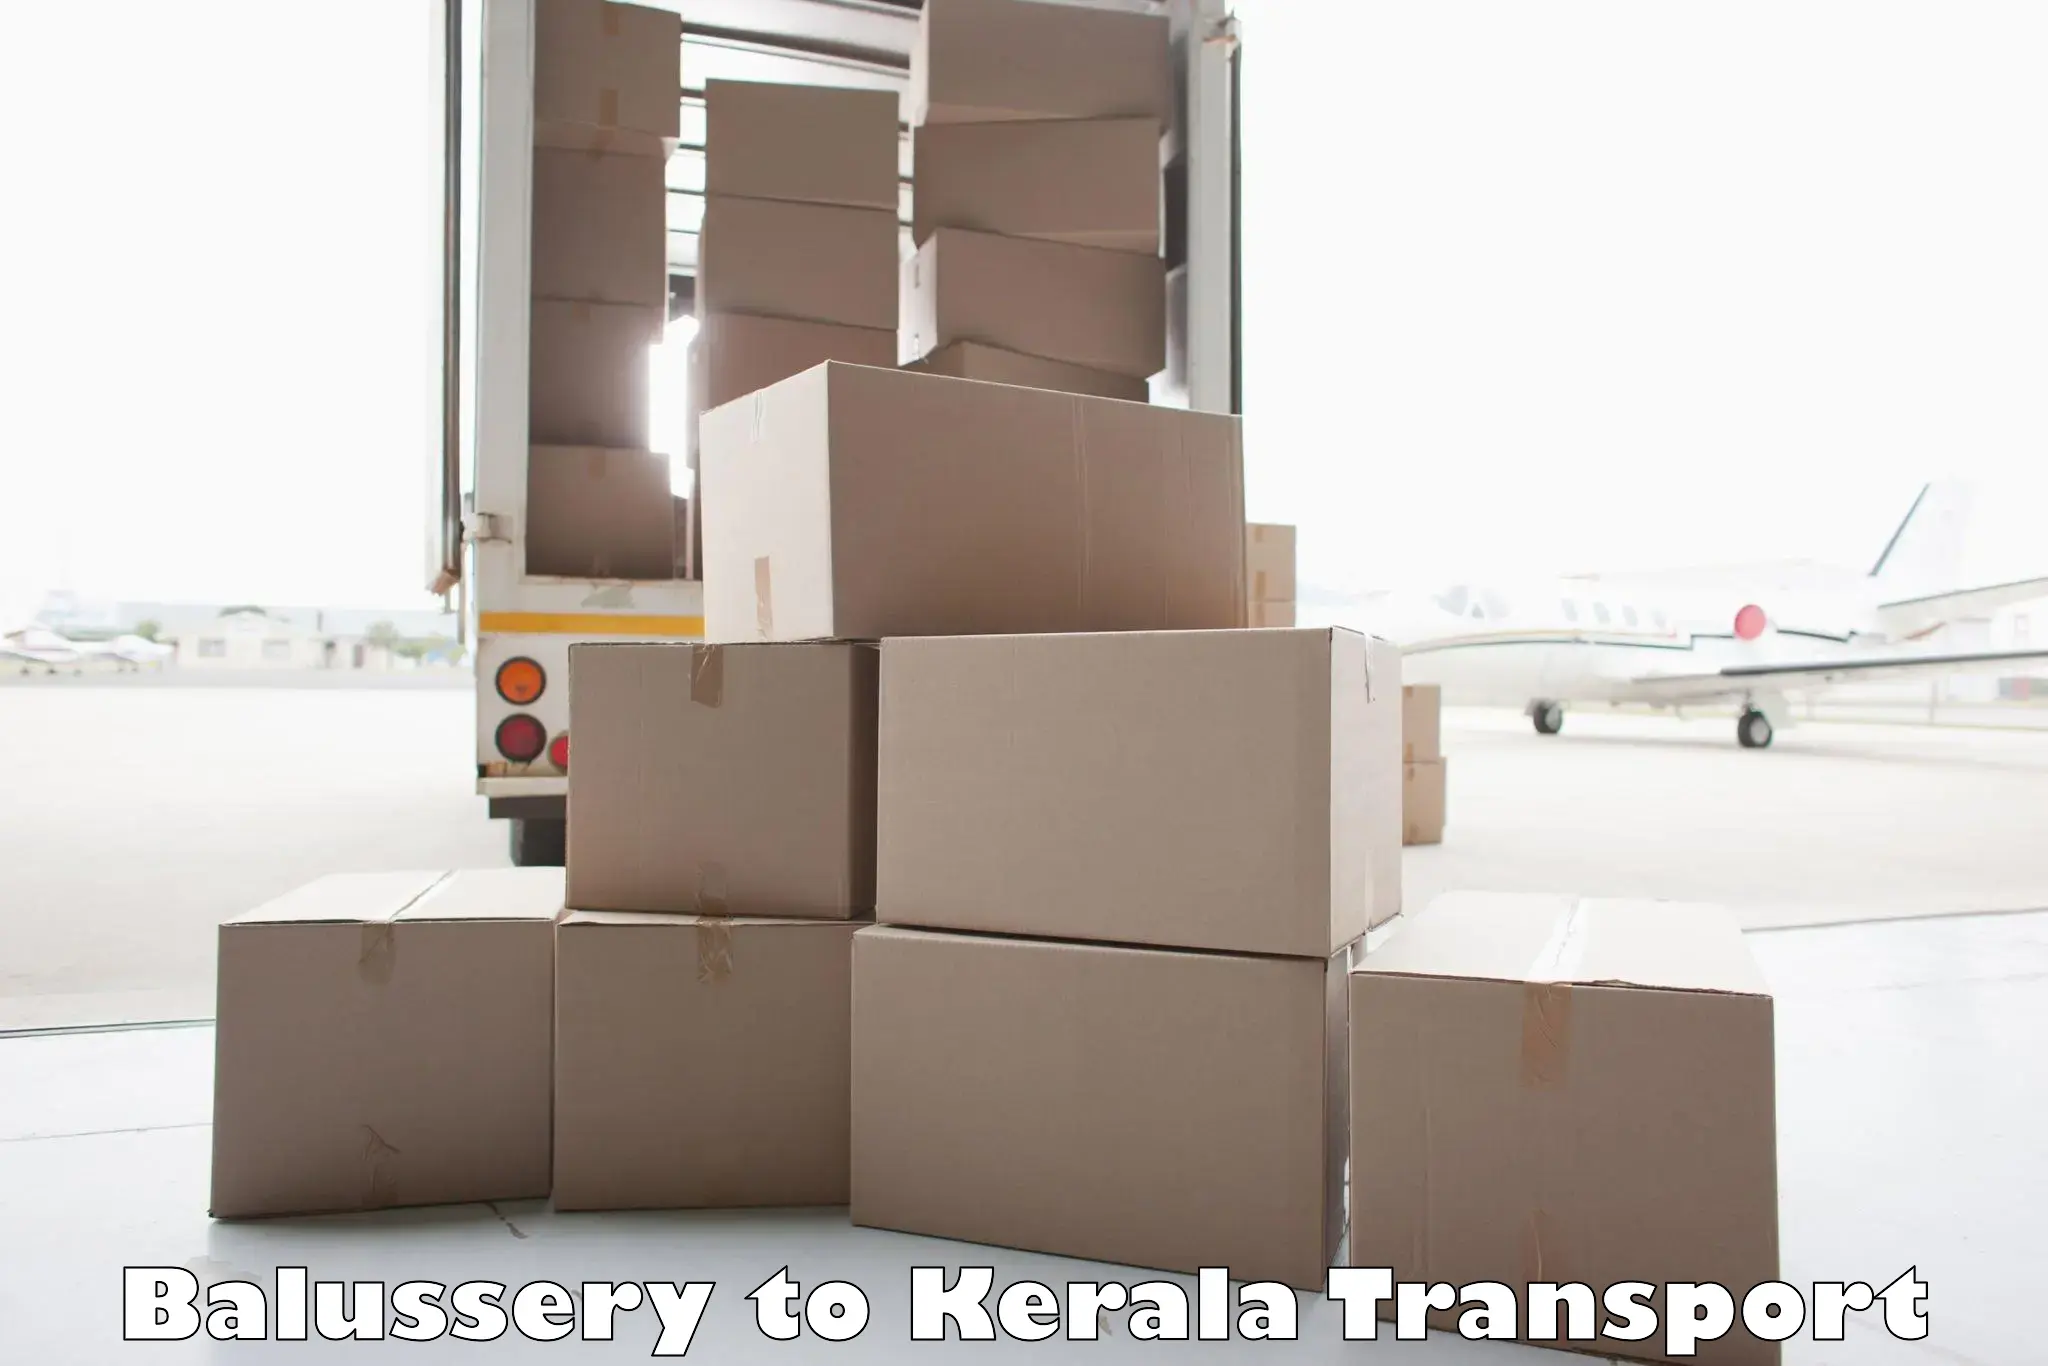 Online transport booking Balussery to Palakkad